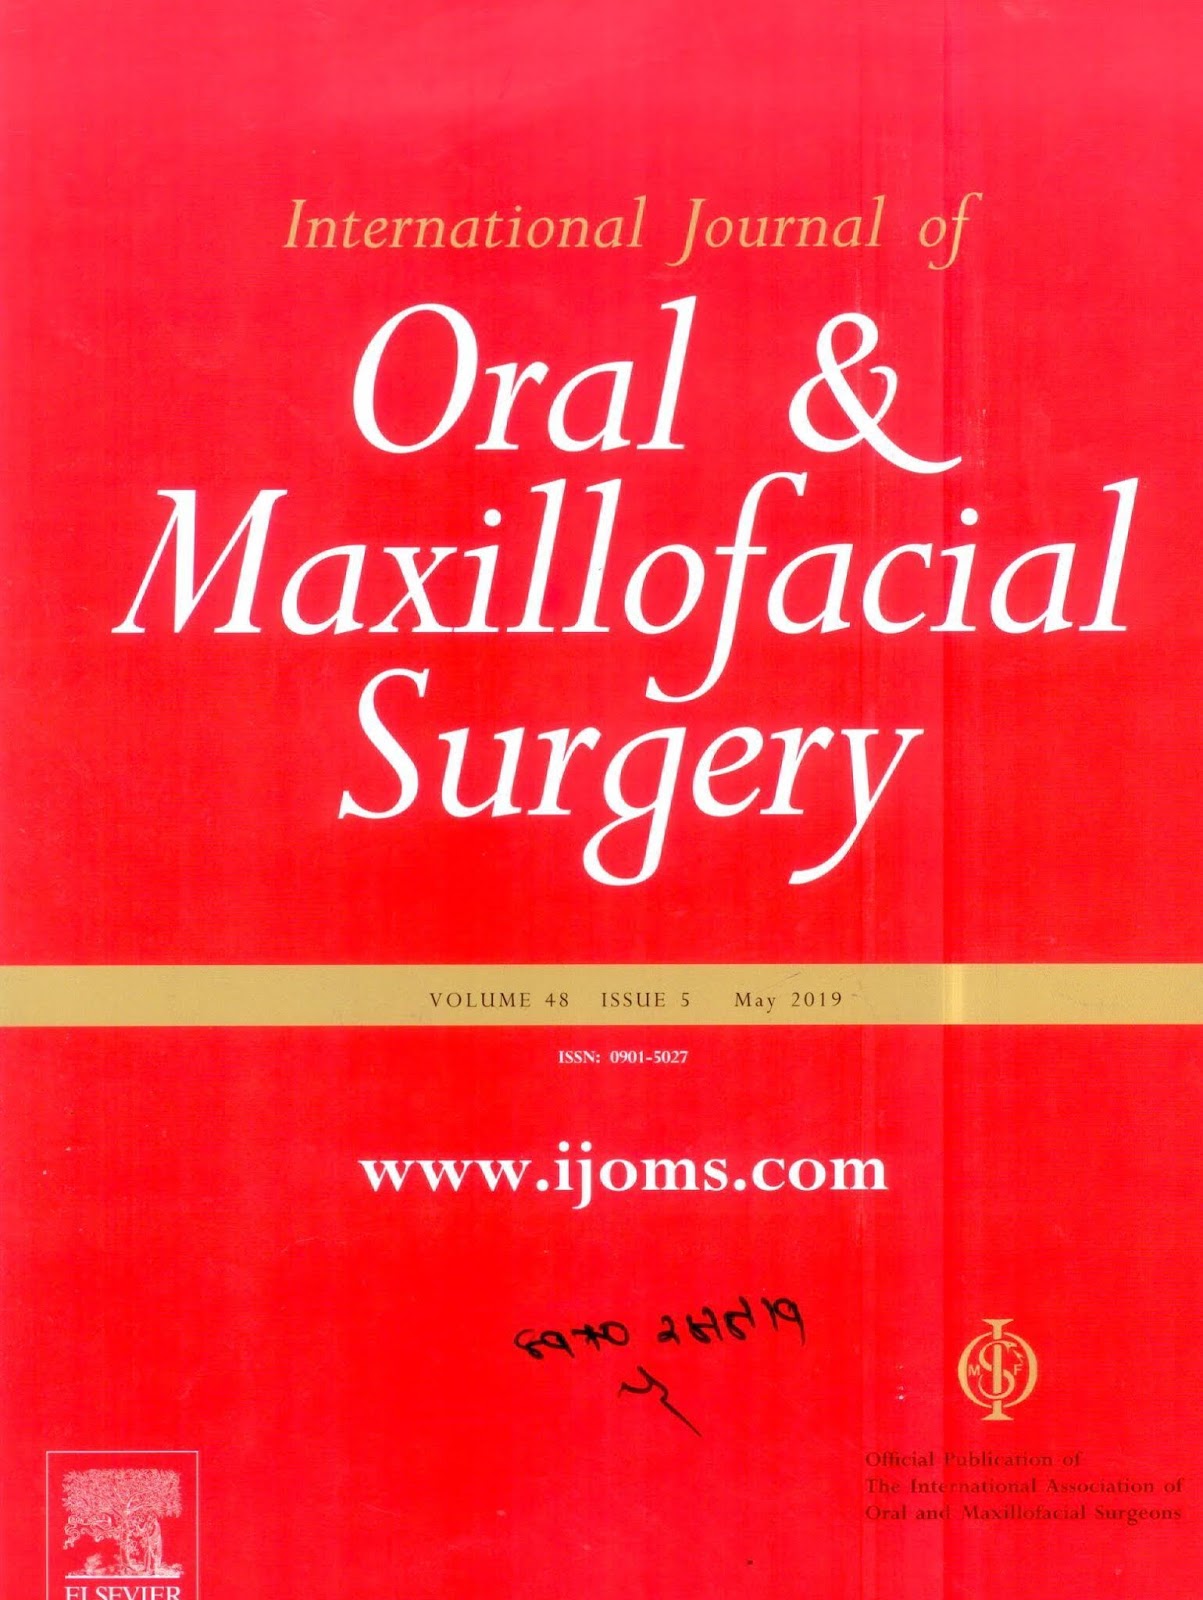 https://www.sciencedirect.com/journal/international-journal-of-oral-and-maxillofacial-surgery/vol/48/issue/5